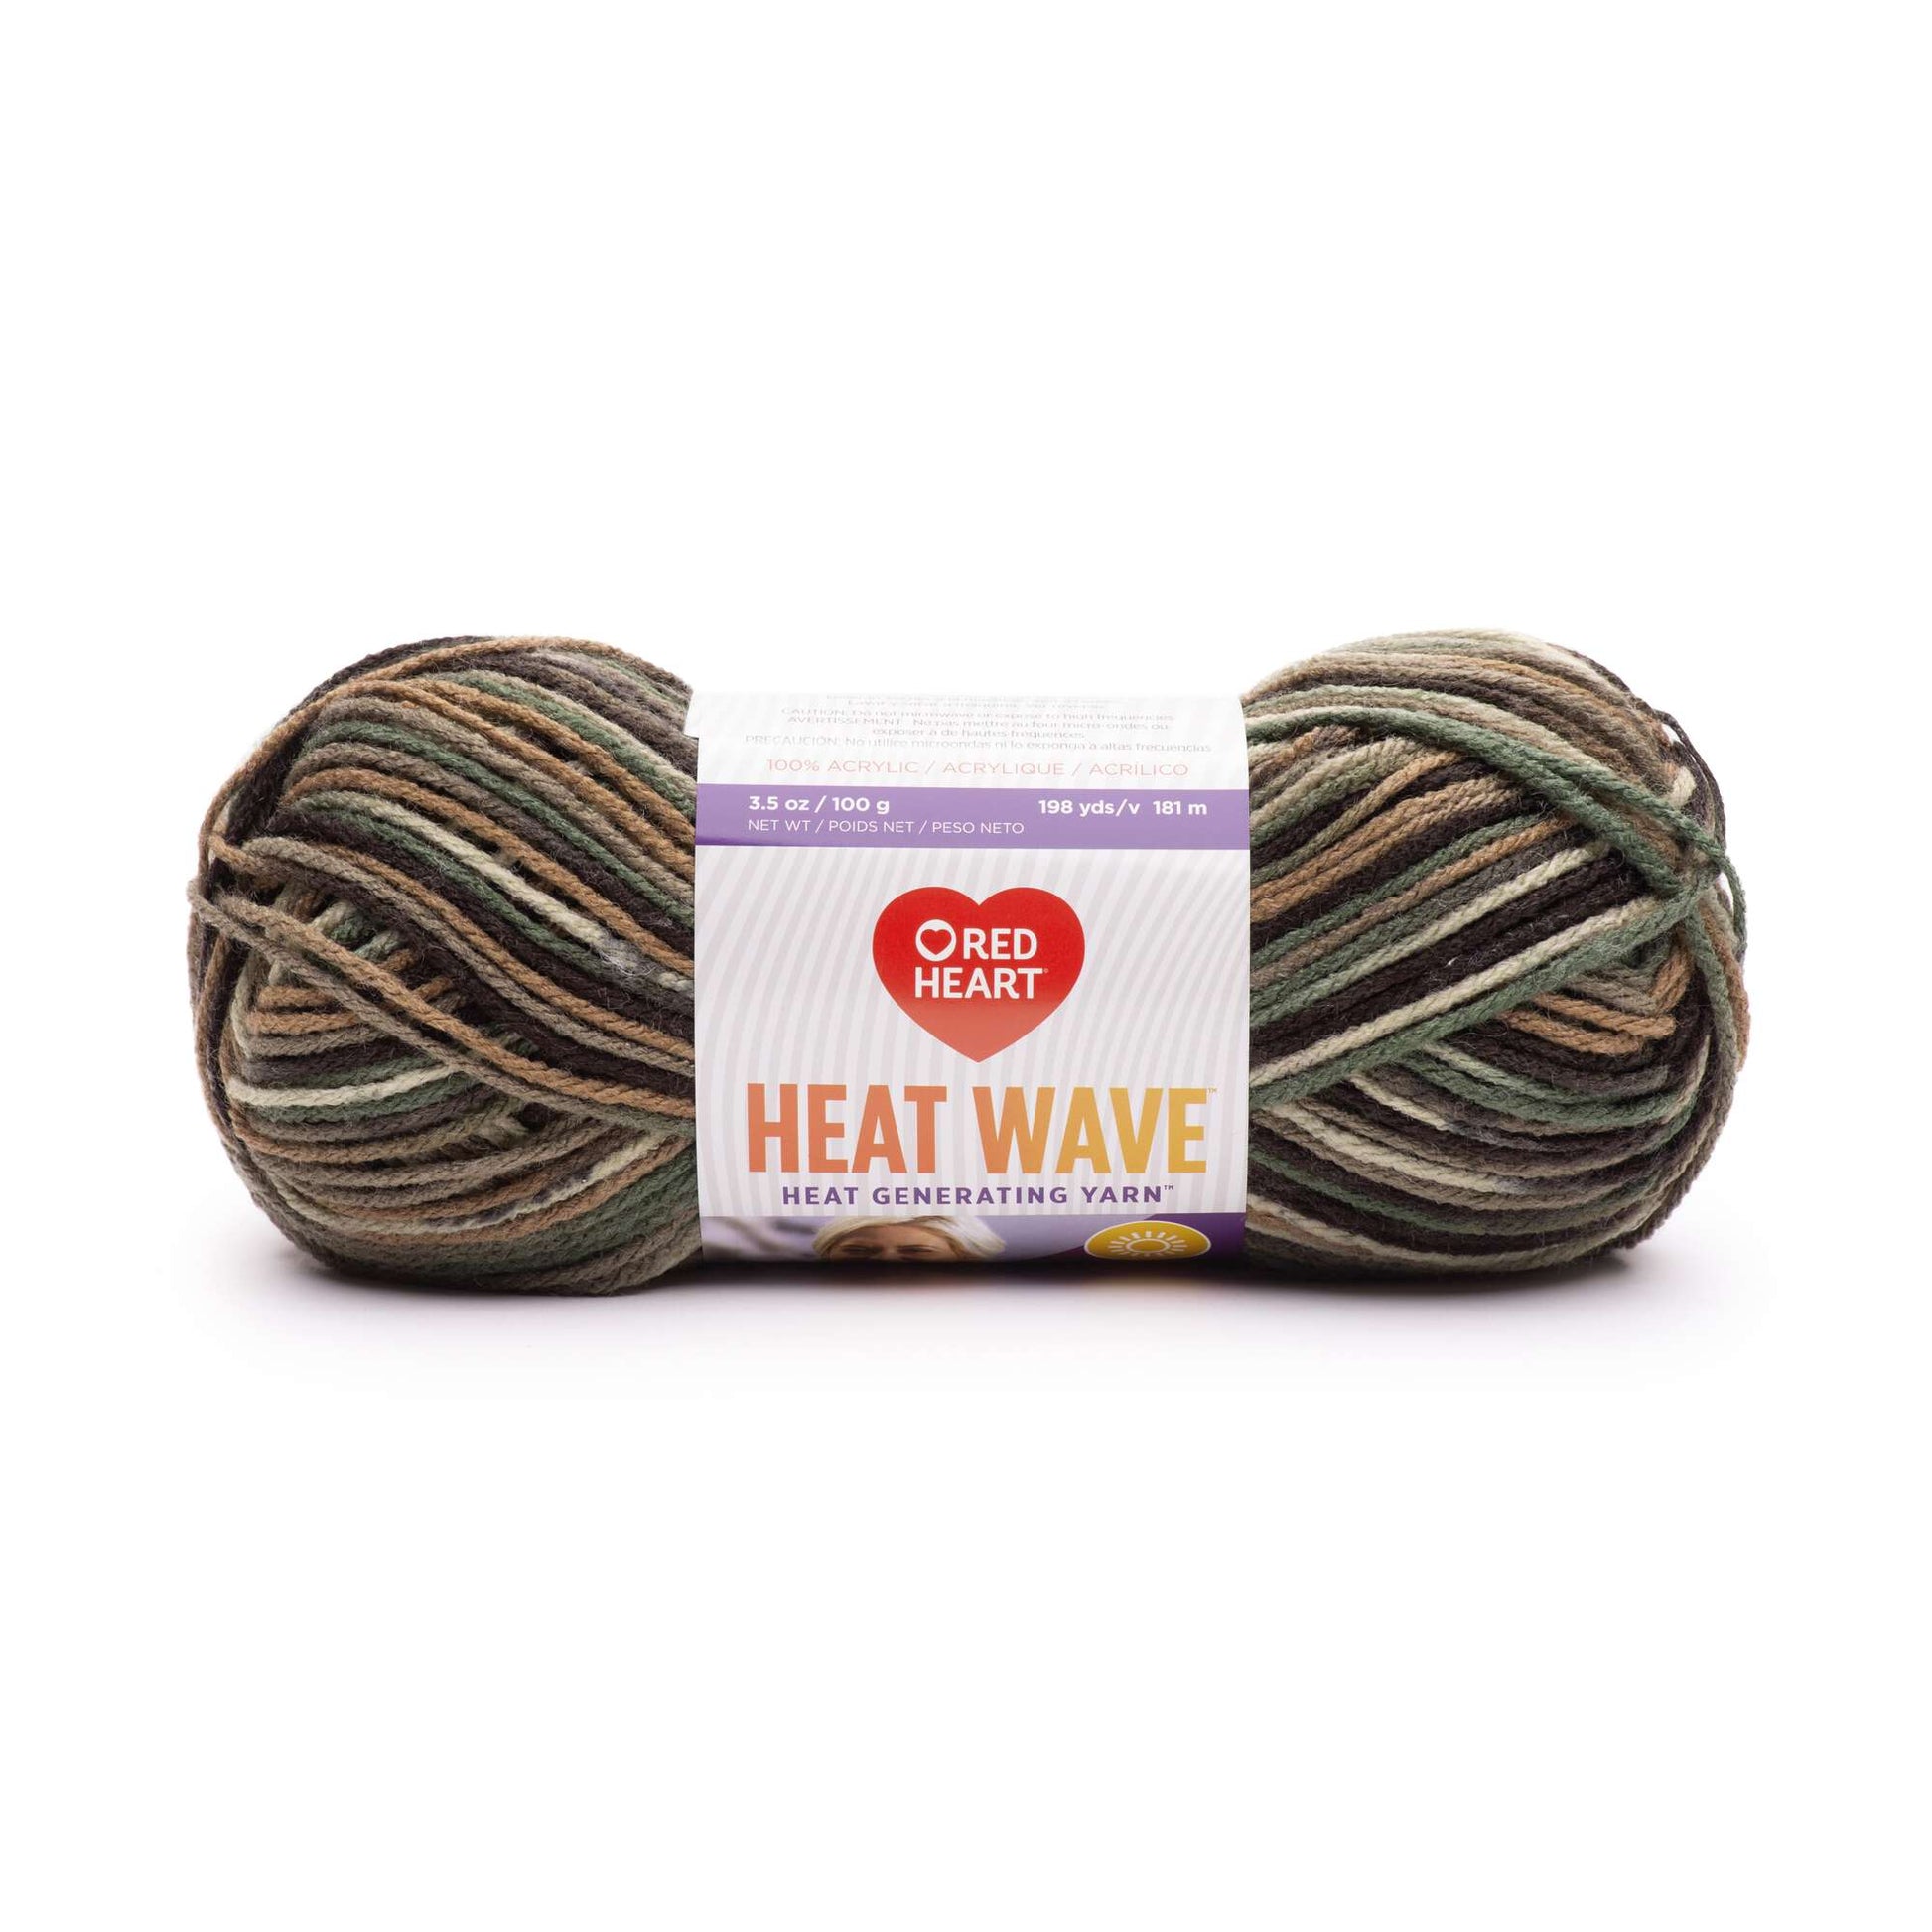 Red Heart Heat Wave Yarn - Discontinued shades Campfire